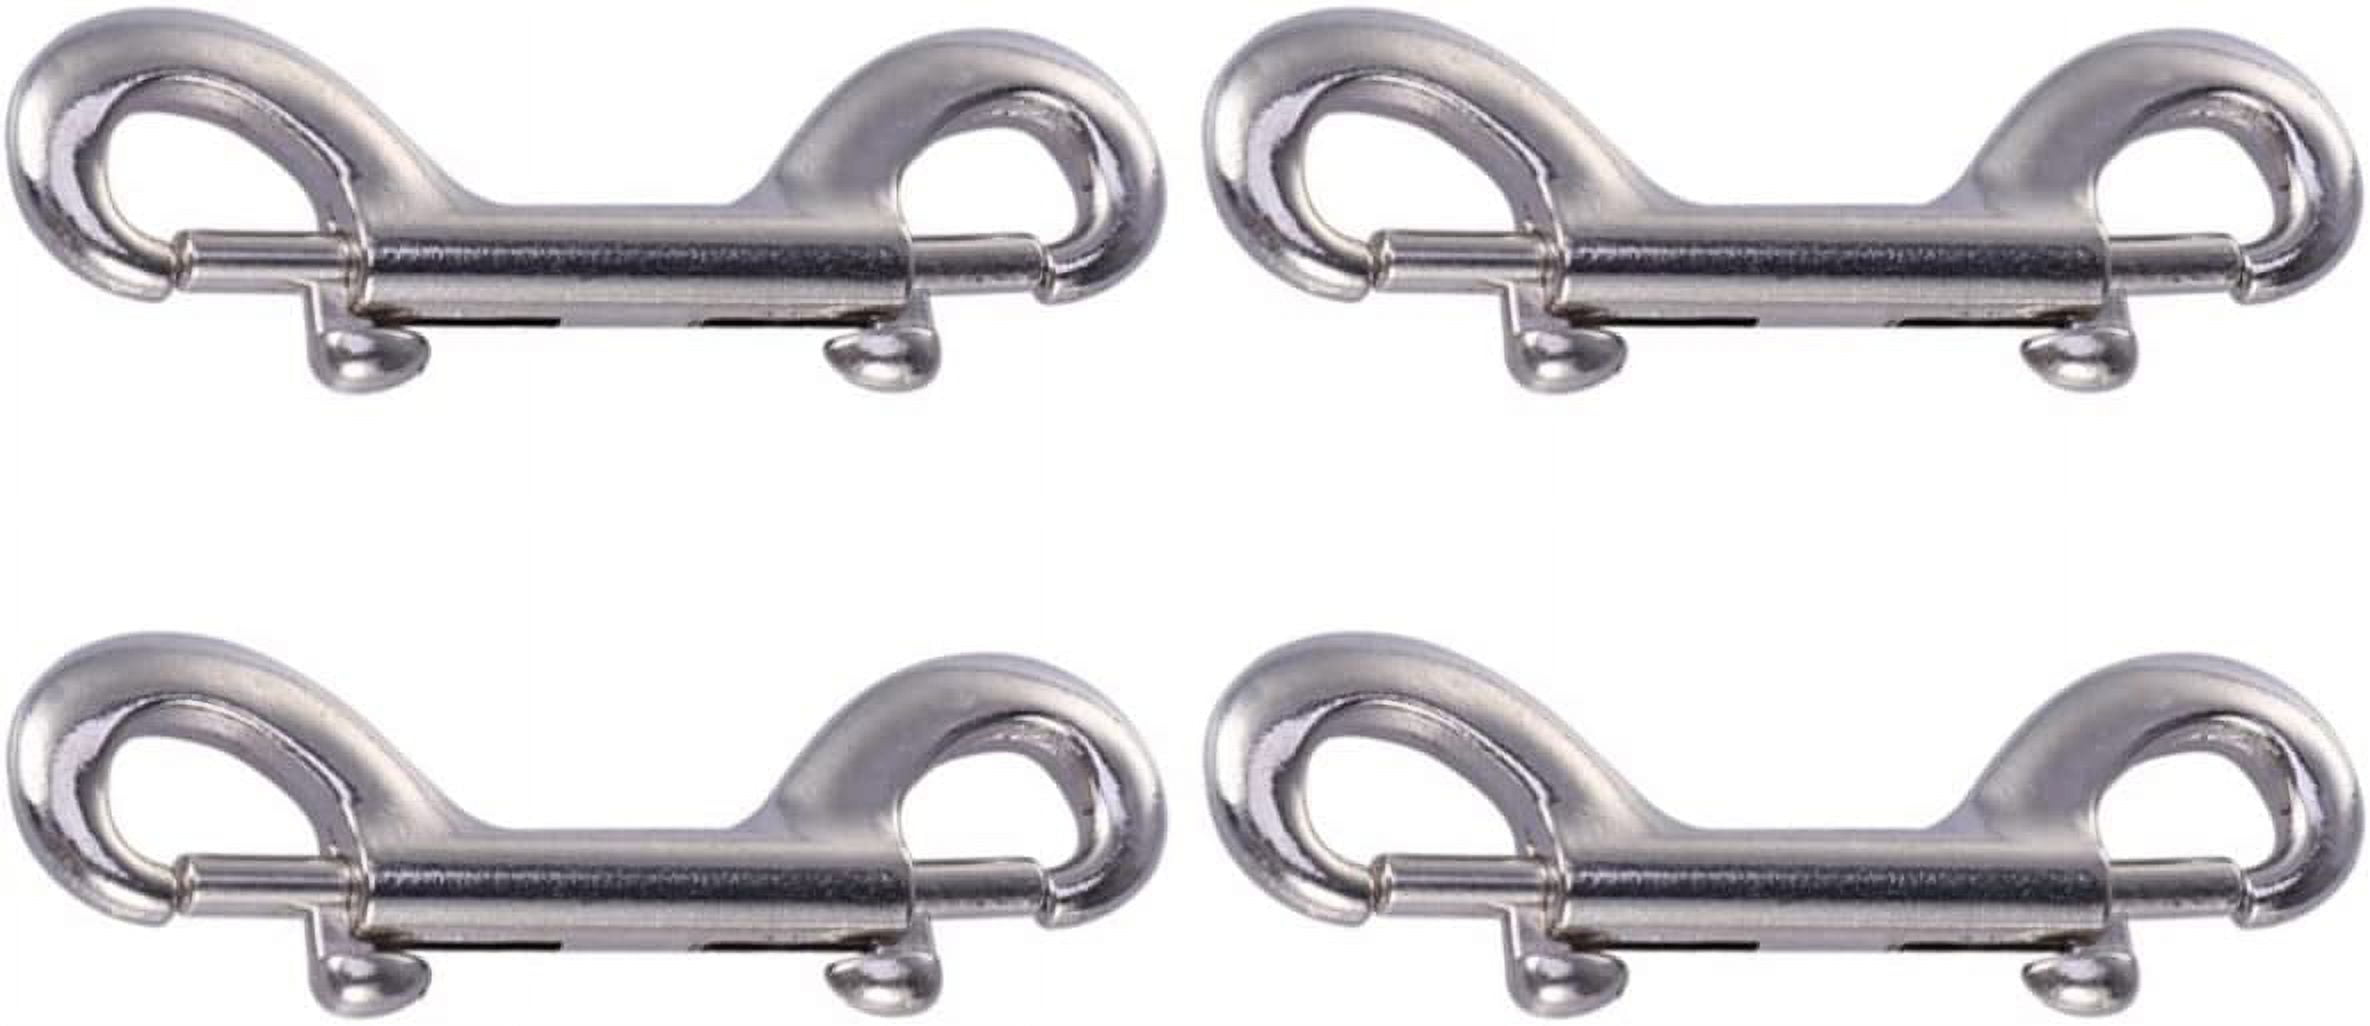 Hillman Hardware Essentials Double Ended Bolt Snap Nickel (4in.) 6